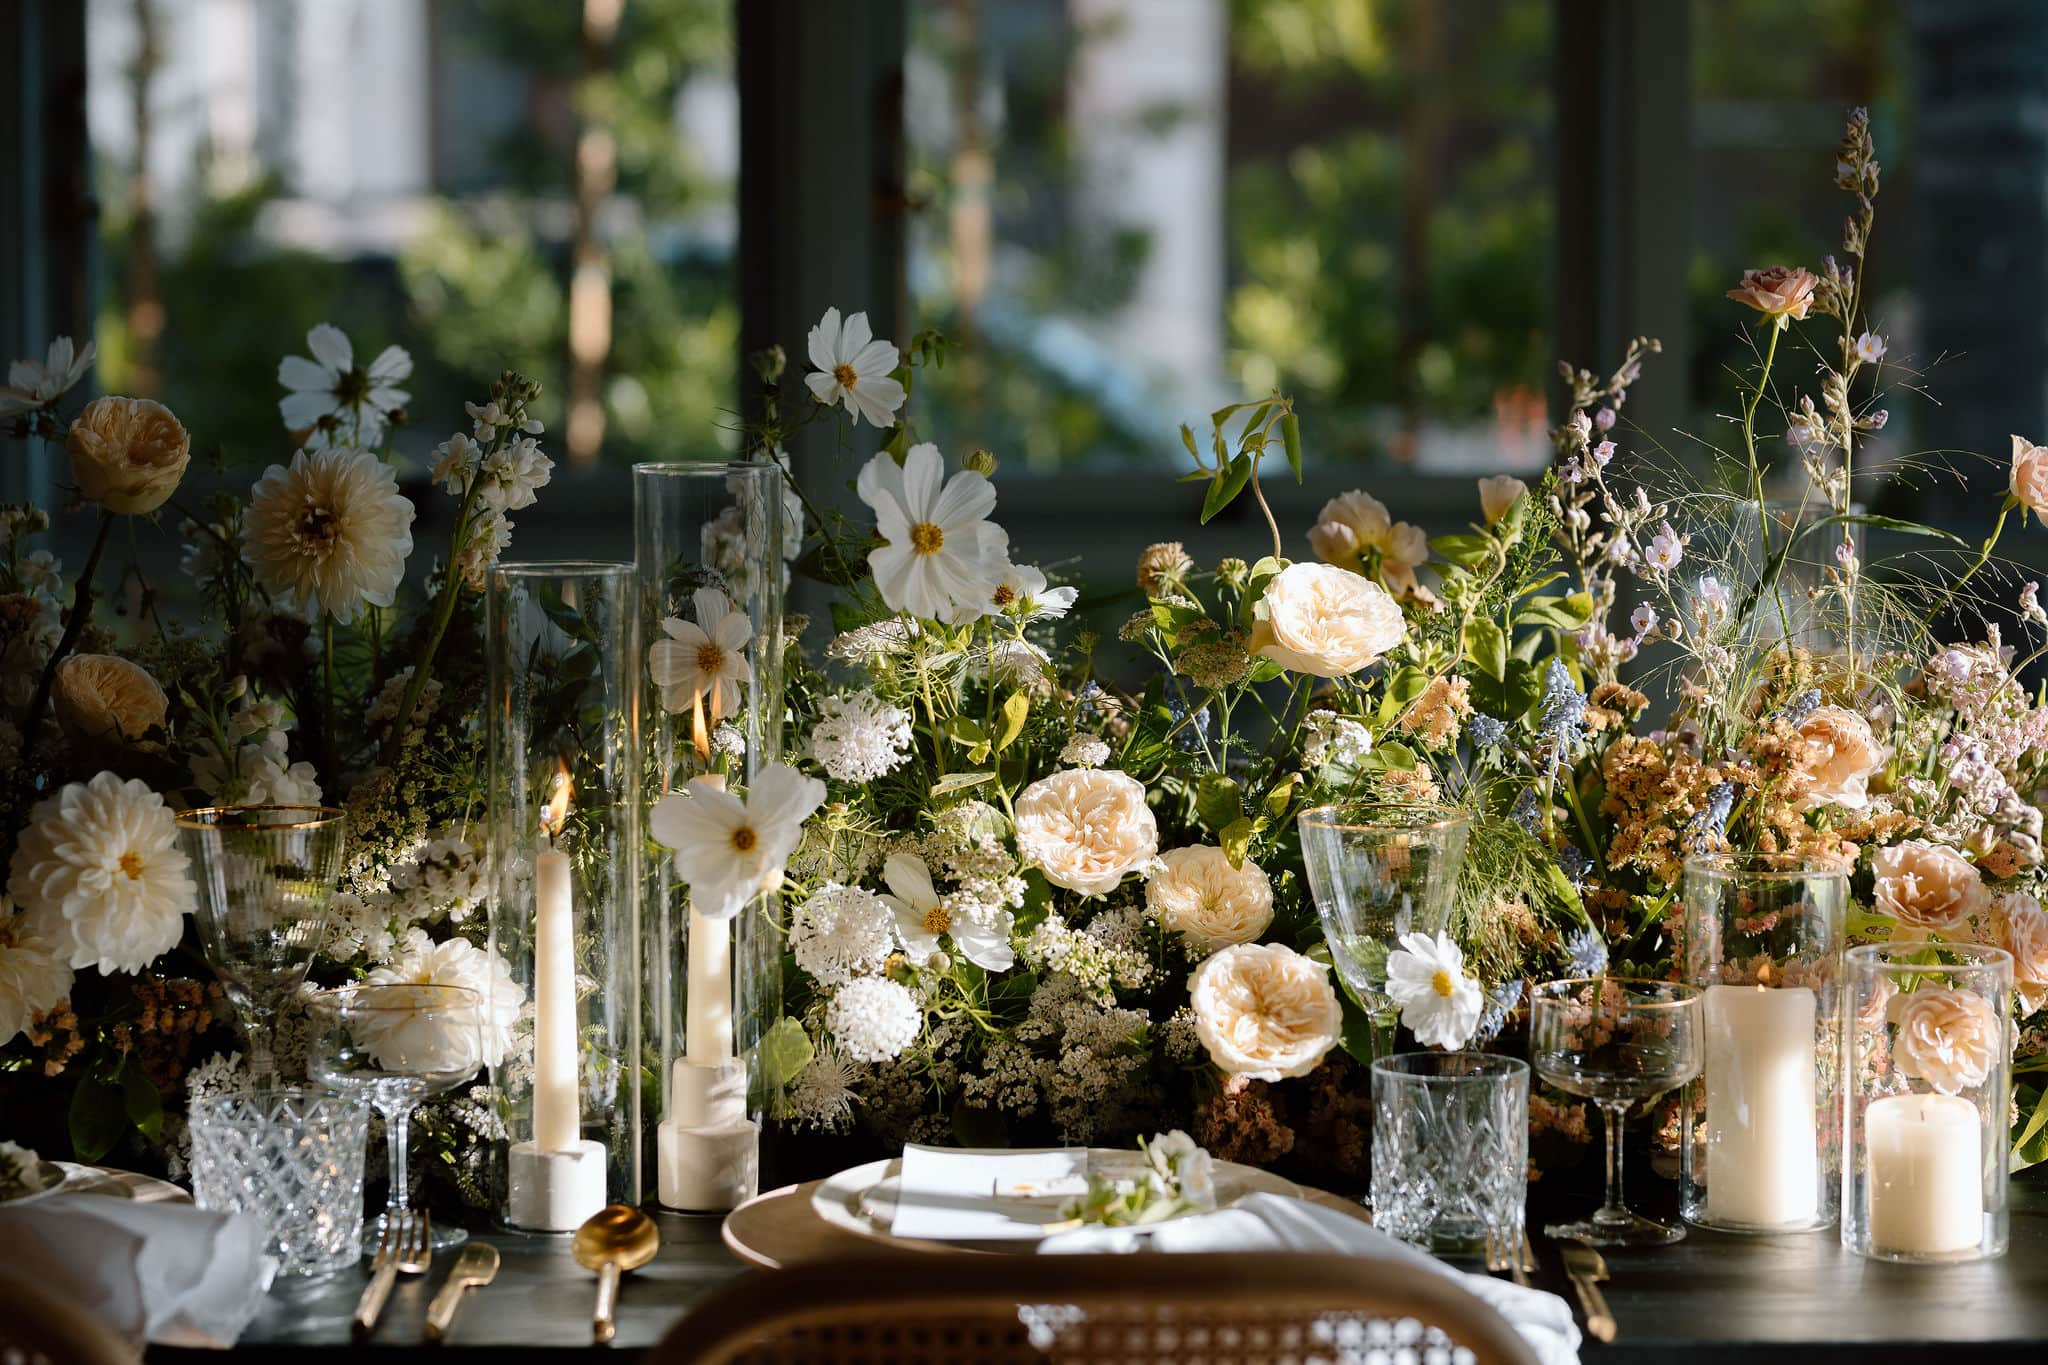 a picture of the flowers and table decor for this wedding at this A Timeless Wedding Venue in Southern California